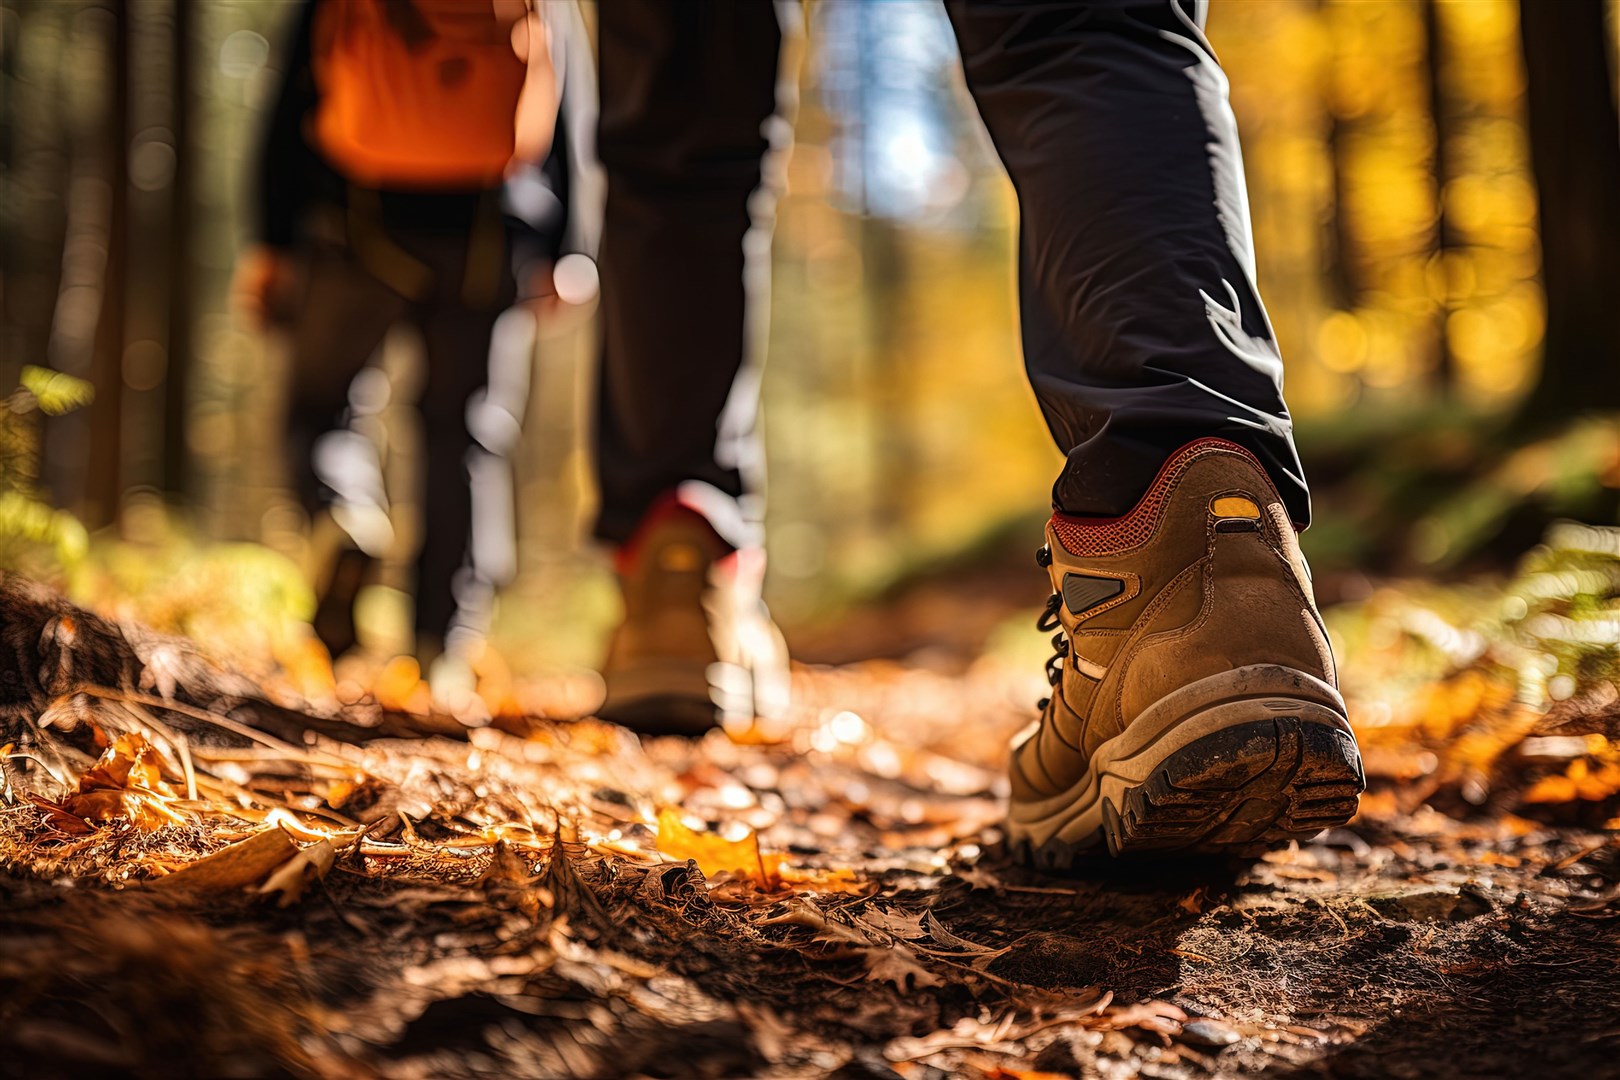 More walking could be an objective worth thinking about.